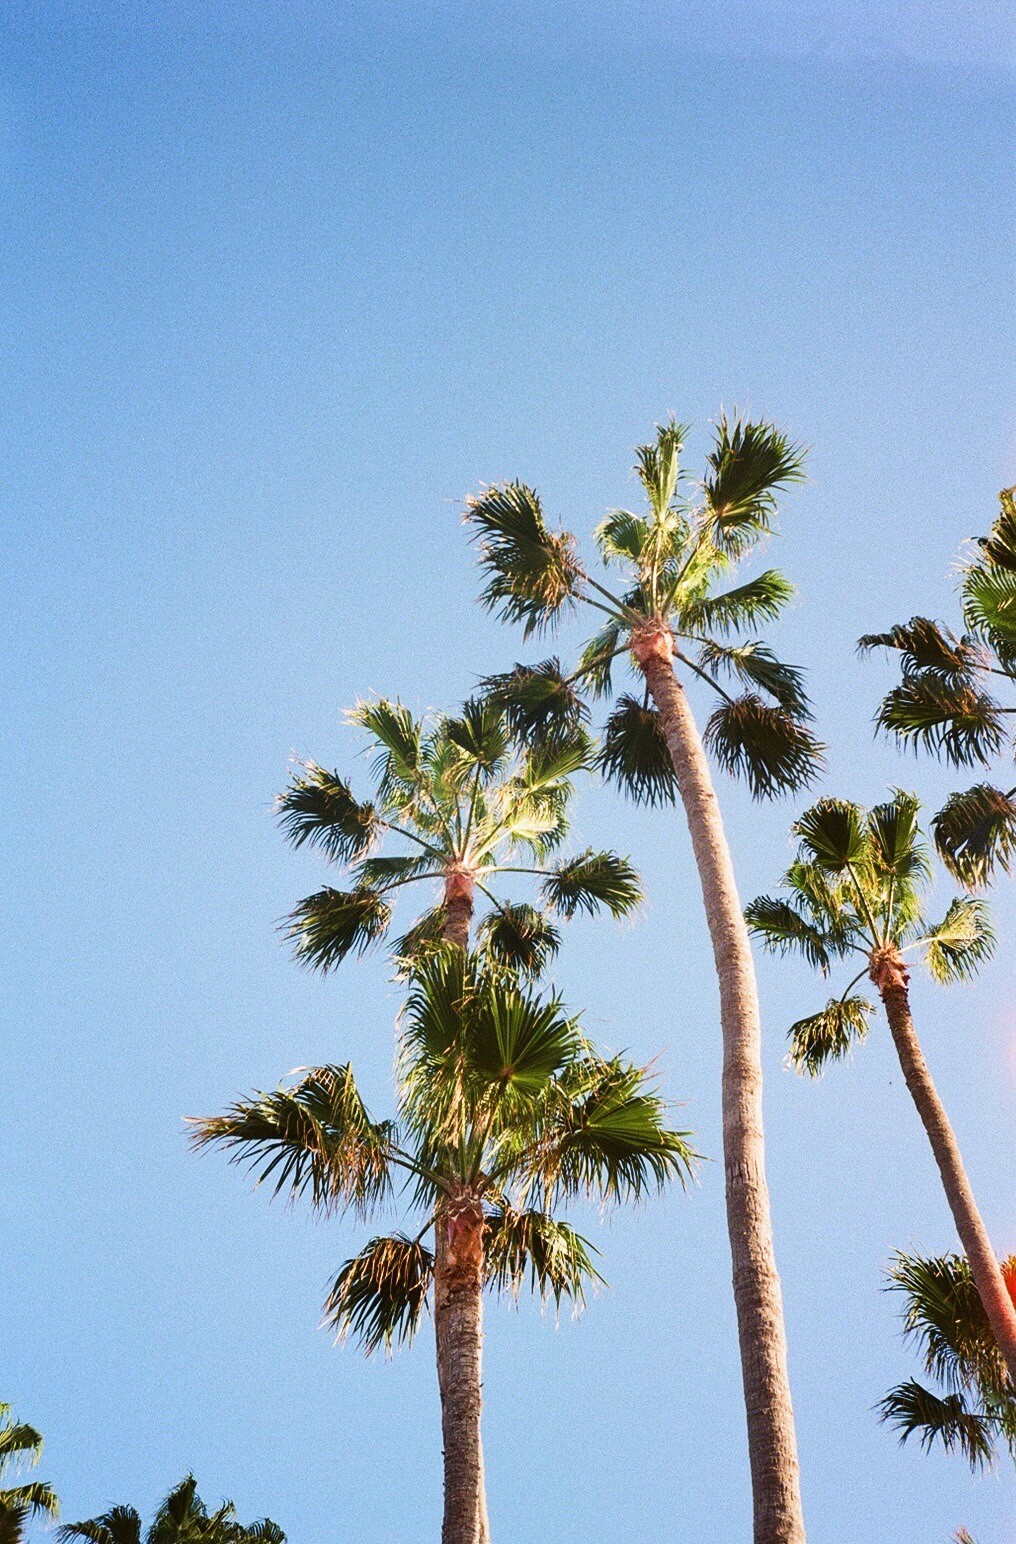 Film photo of palm trees against blue sky.